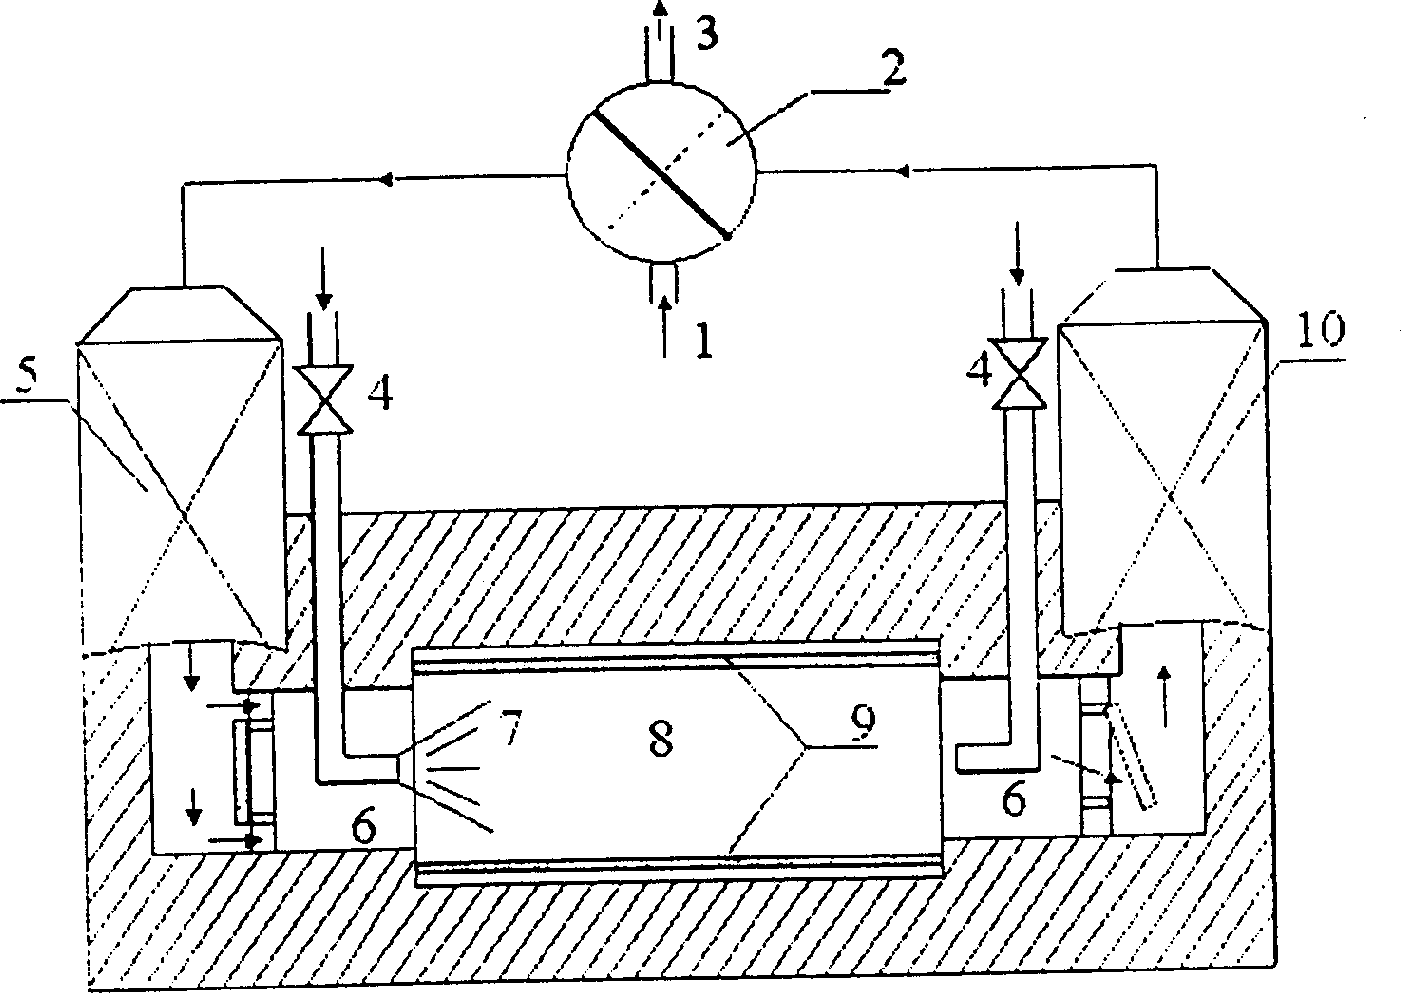 Industrial furnace with high-temperature low-oxygen air burner